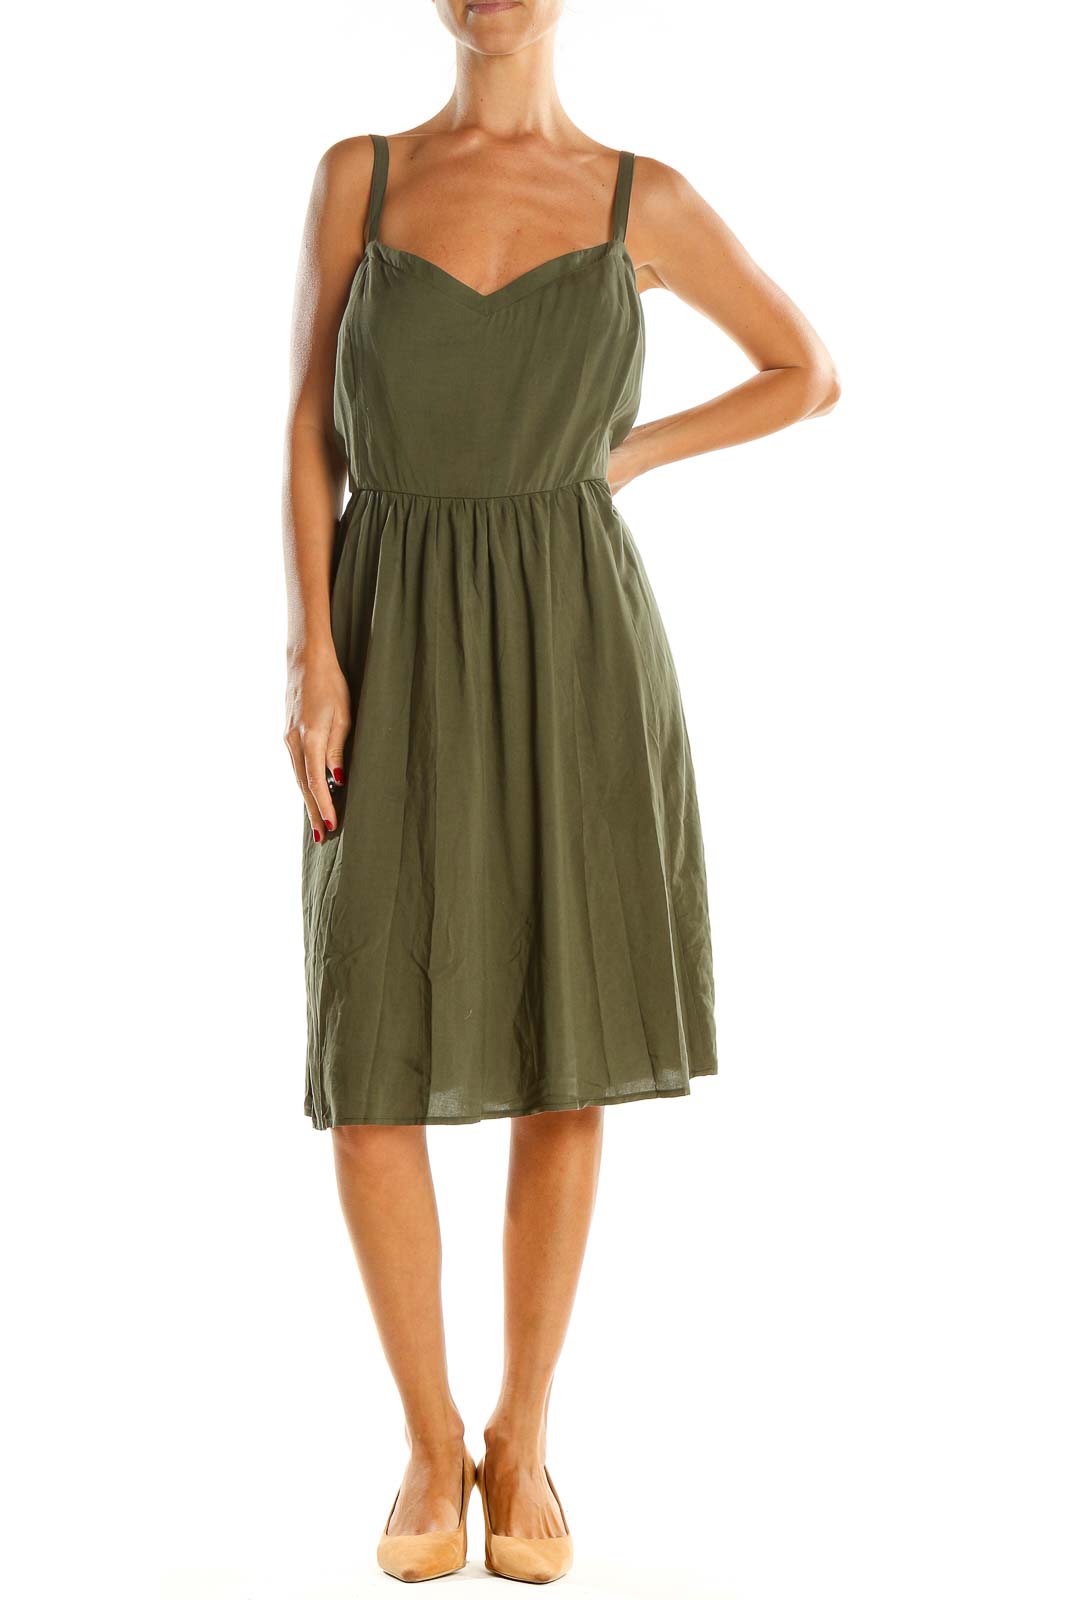 Green Classic Fit & Flare Dress Front